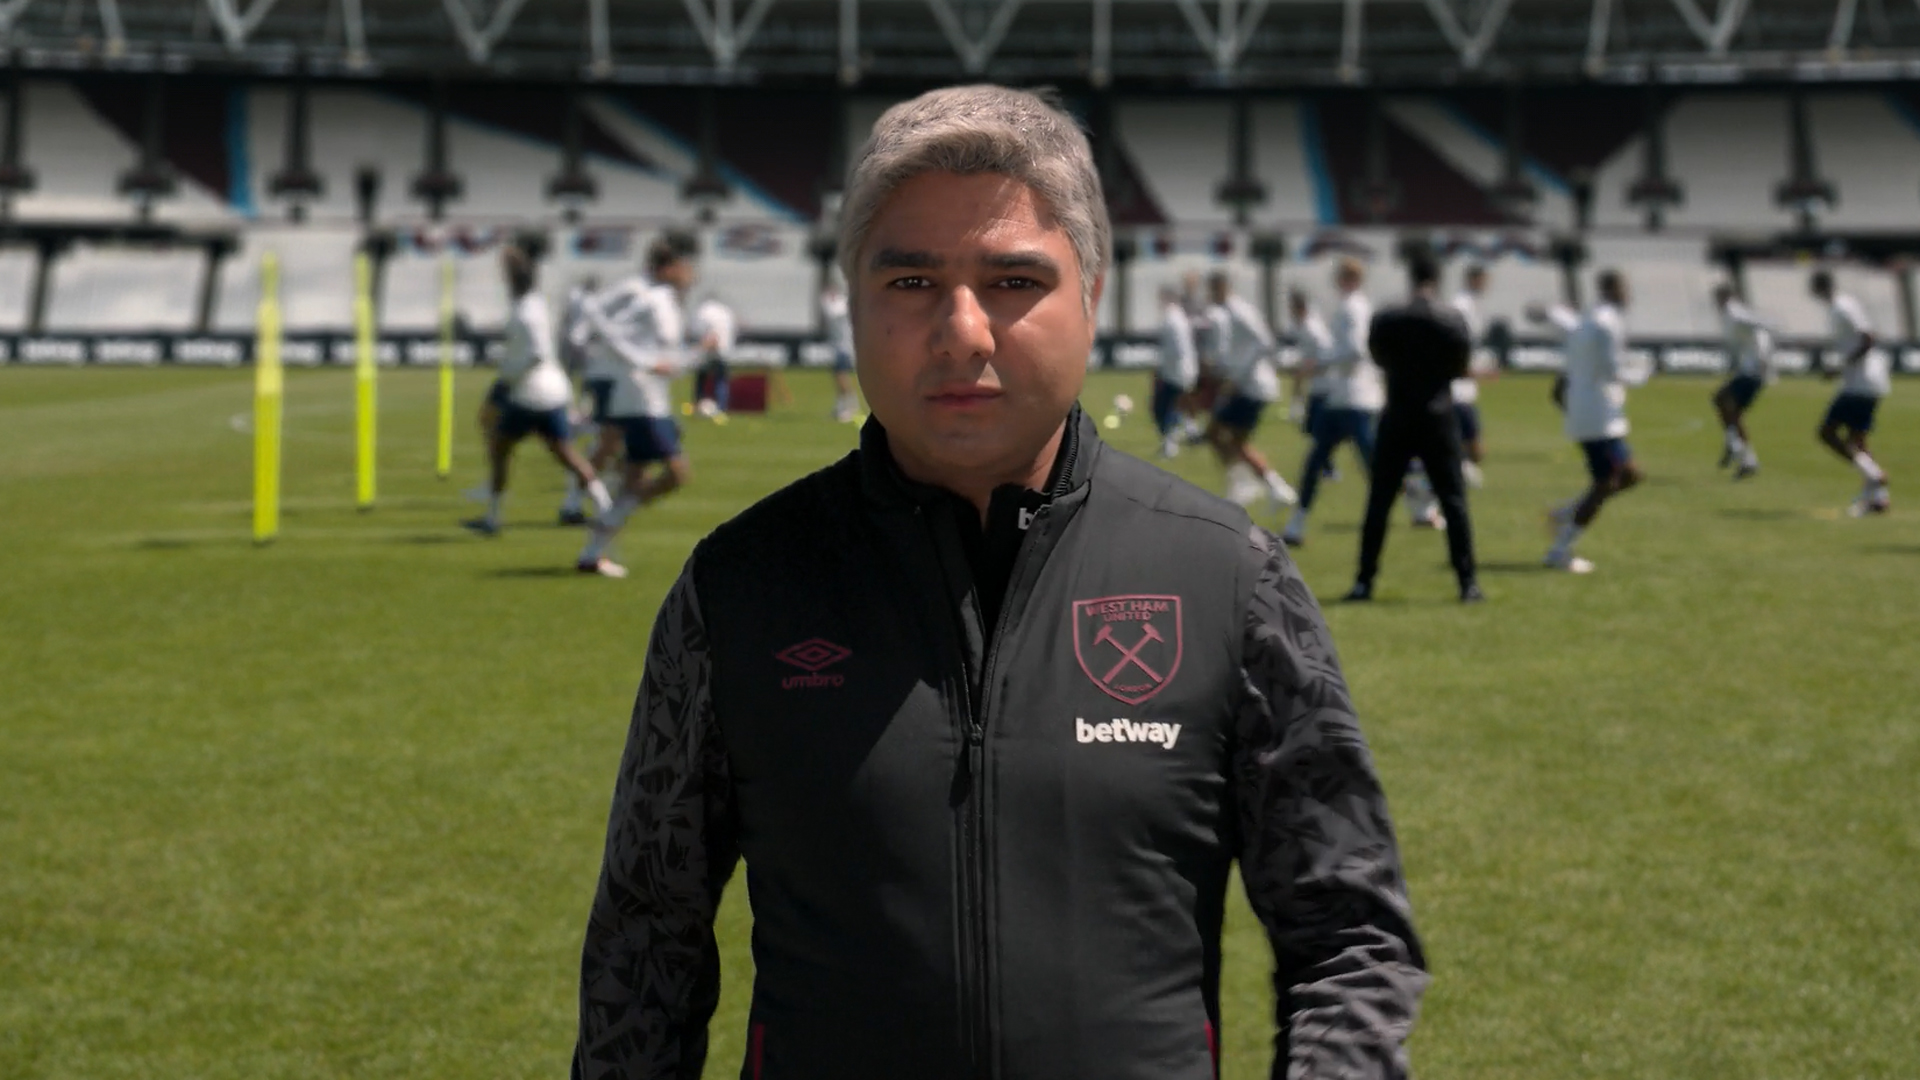 Nate Shelley as West Ham manager in Ted Lasso's season 2 finale